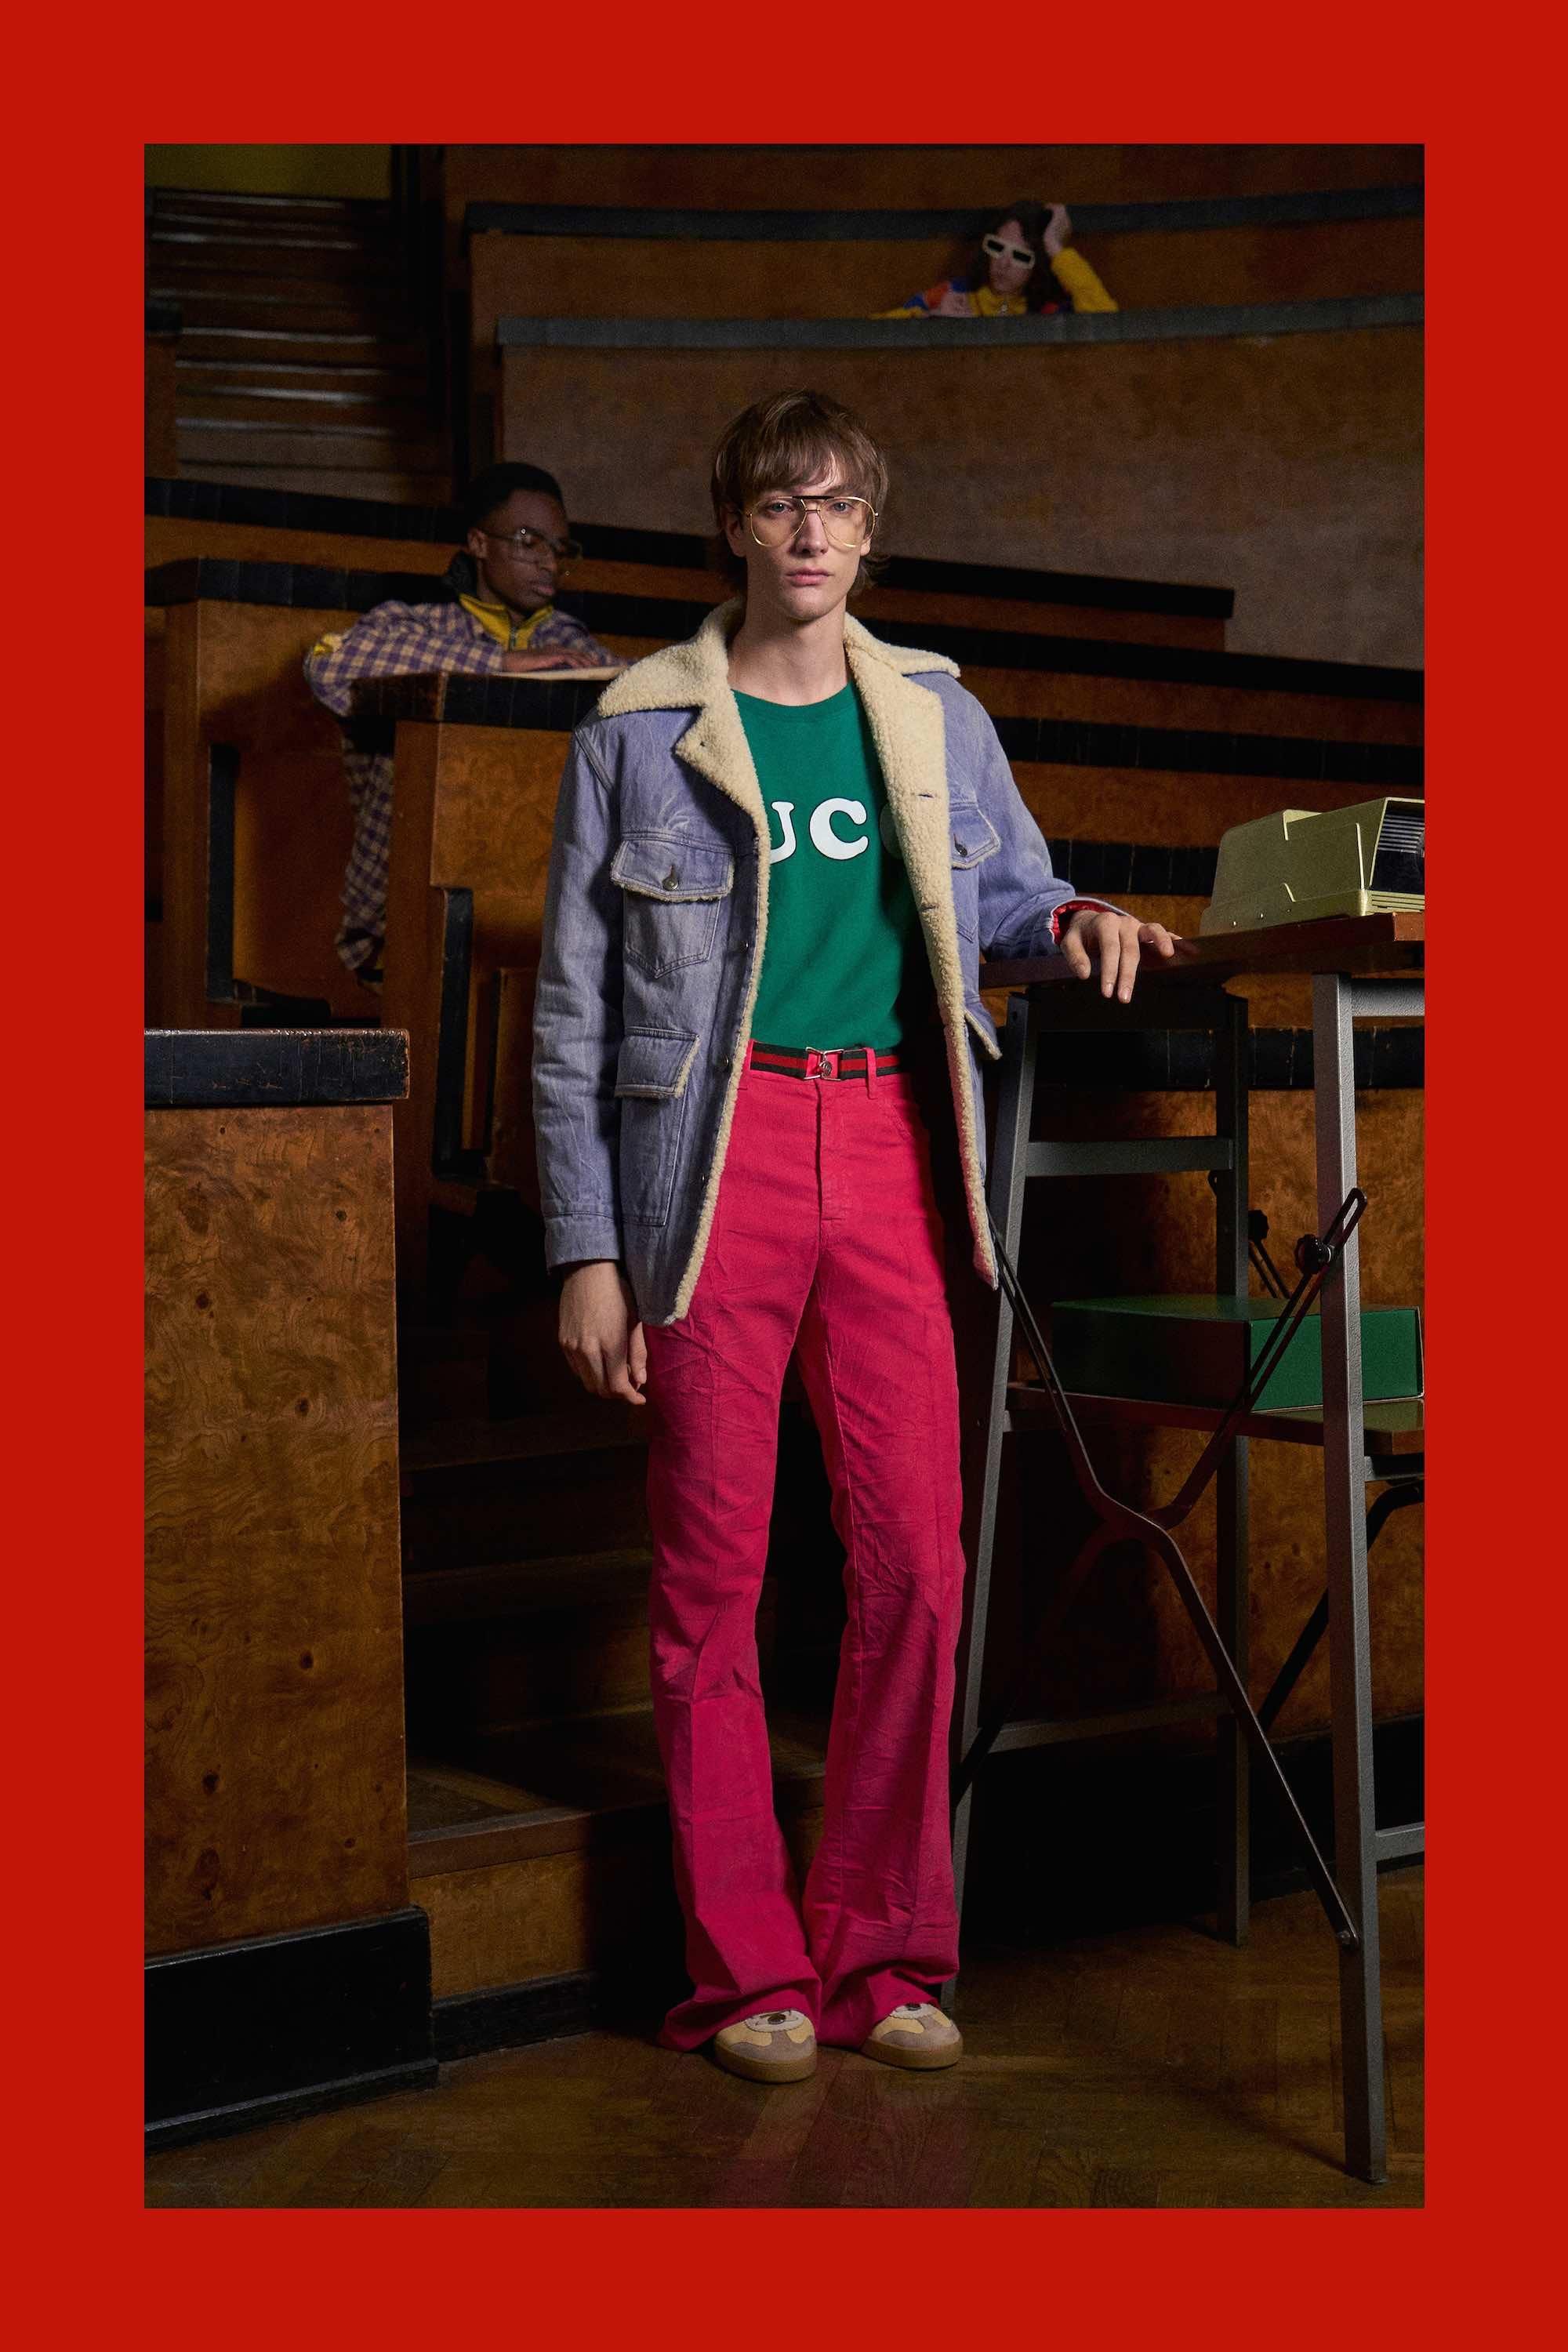 Take a Big, Gay Roman Holiday with Gucci's Gorgeous New Lookbook